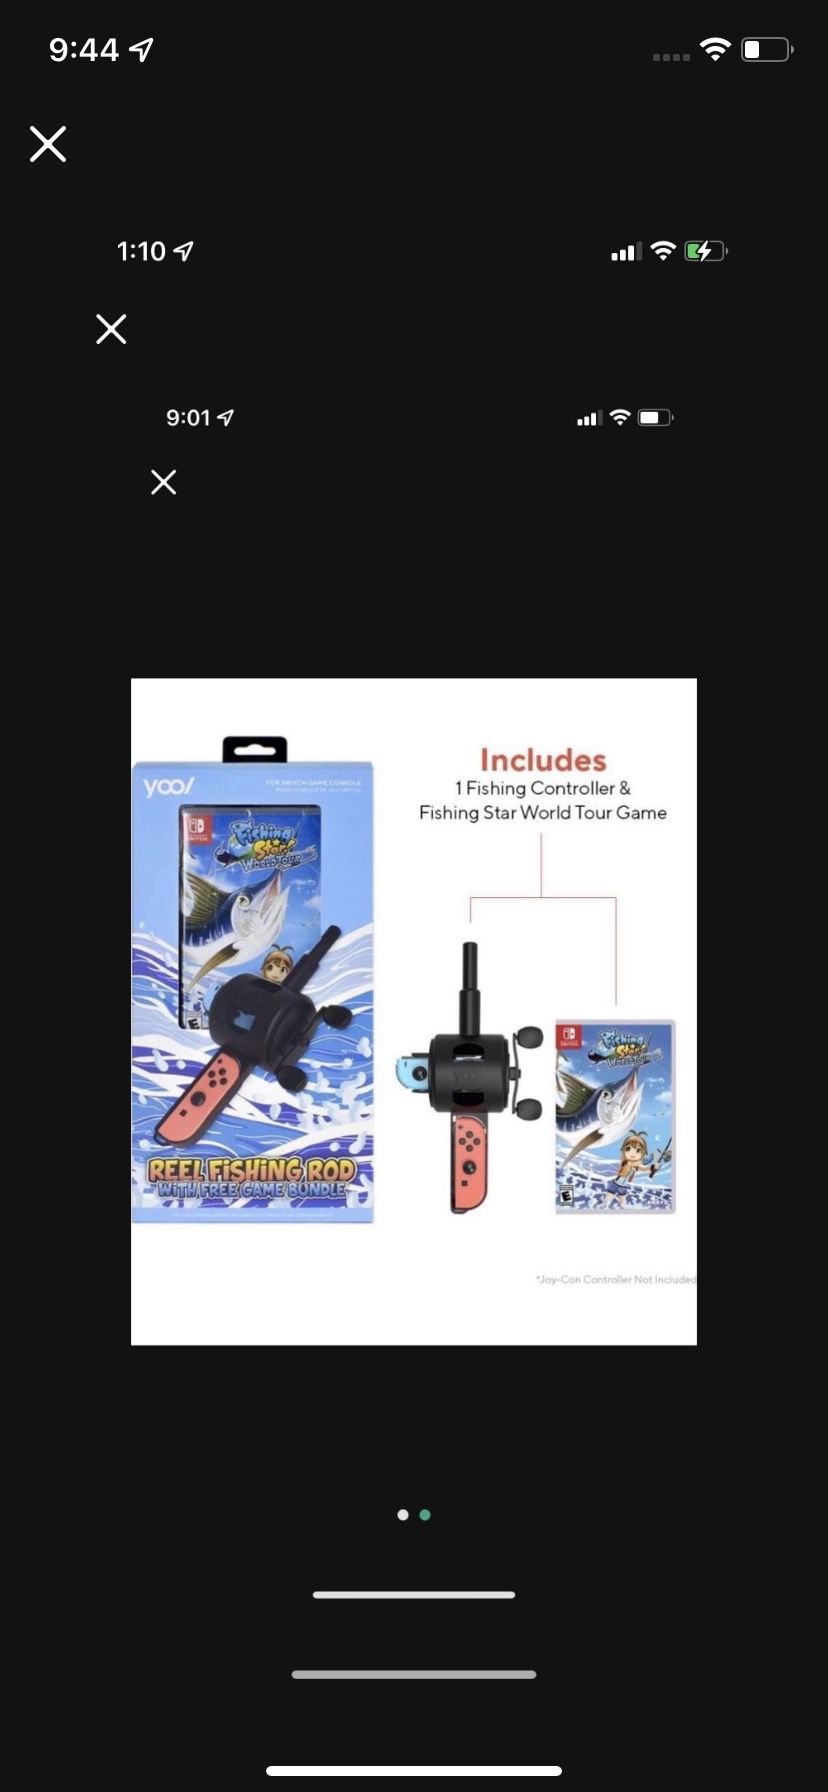 Reel Fishing Rod Bundle with Fishing Star World Tour for Nintendo Switch  New With Game for Sale in Huntington Park, CA - OfferUp